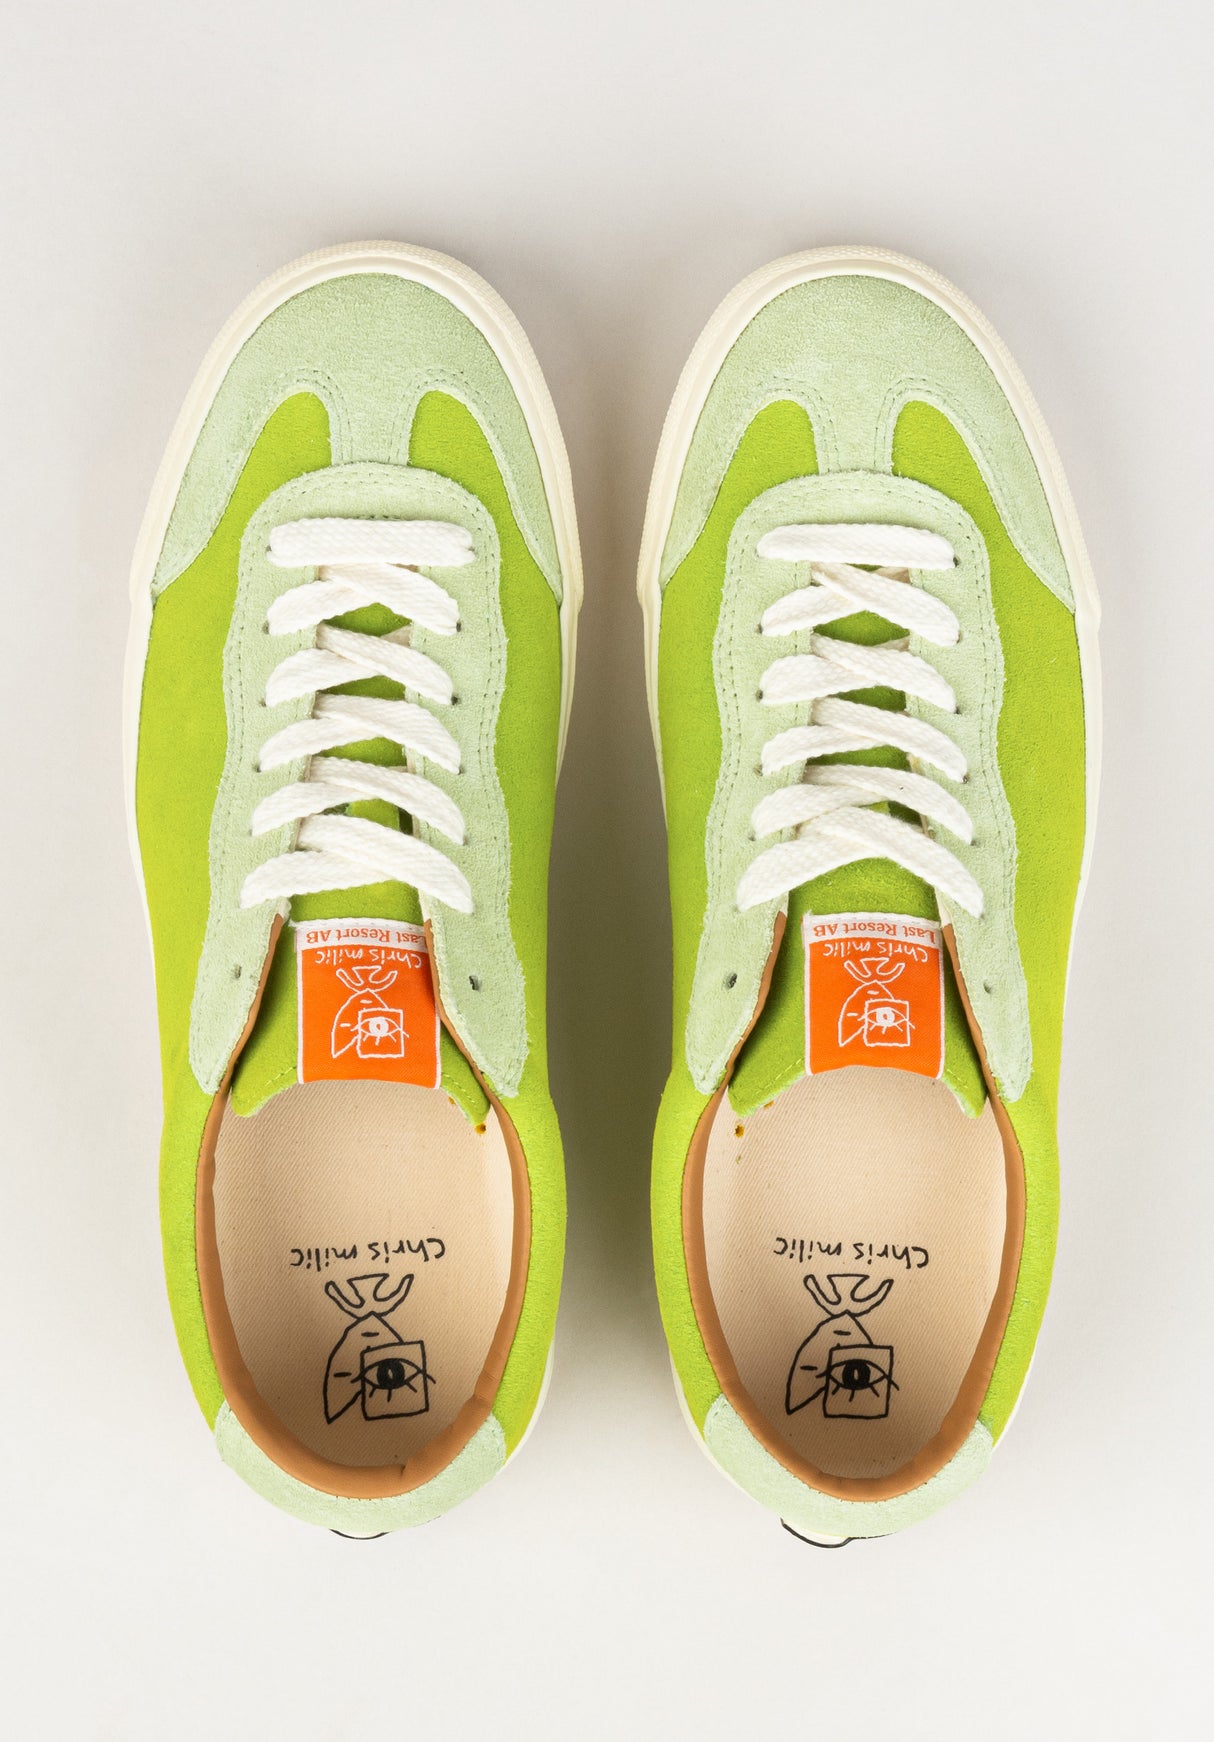 VM004 Milic Leather/Suede Low duogreen-white Close-Up2